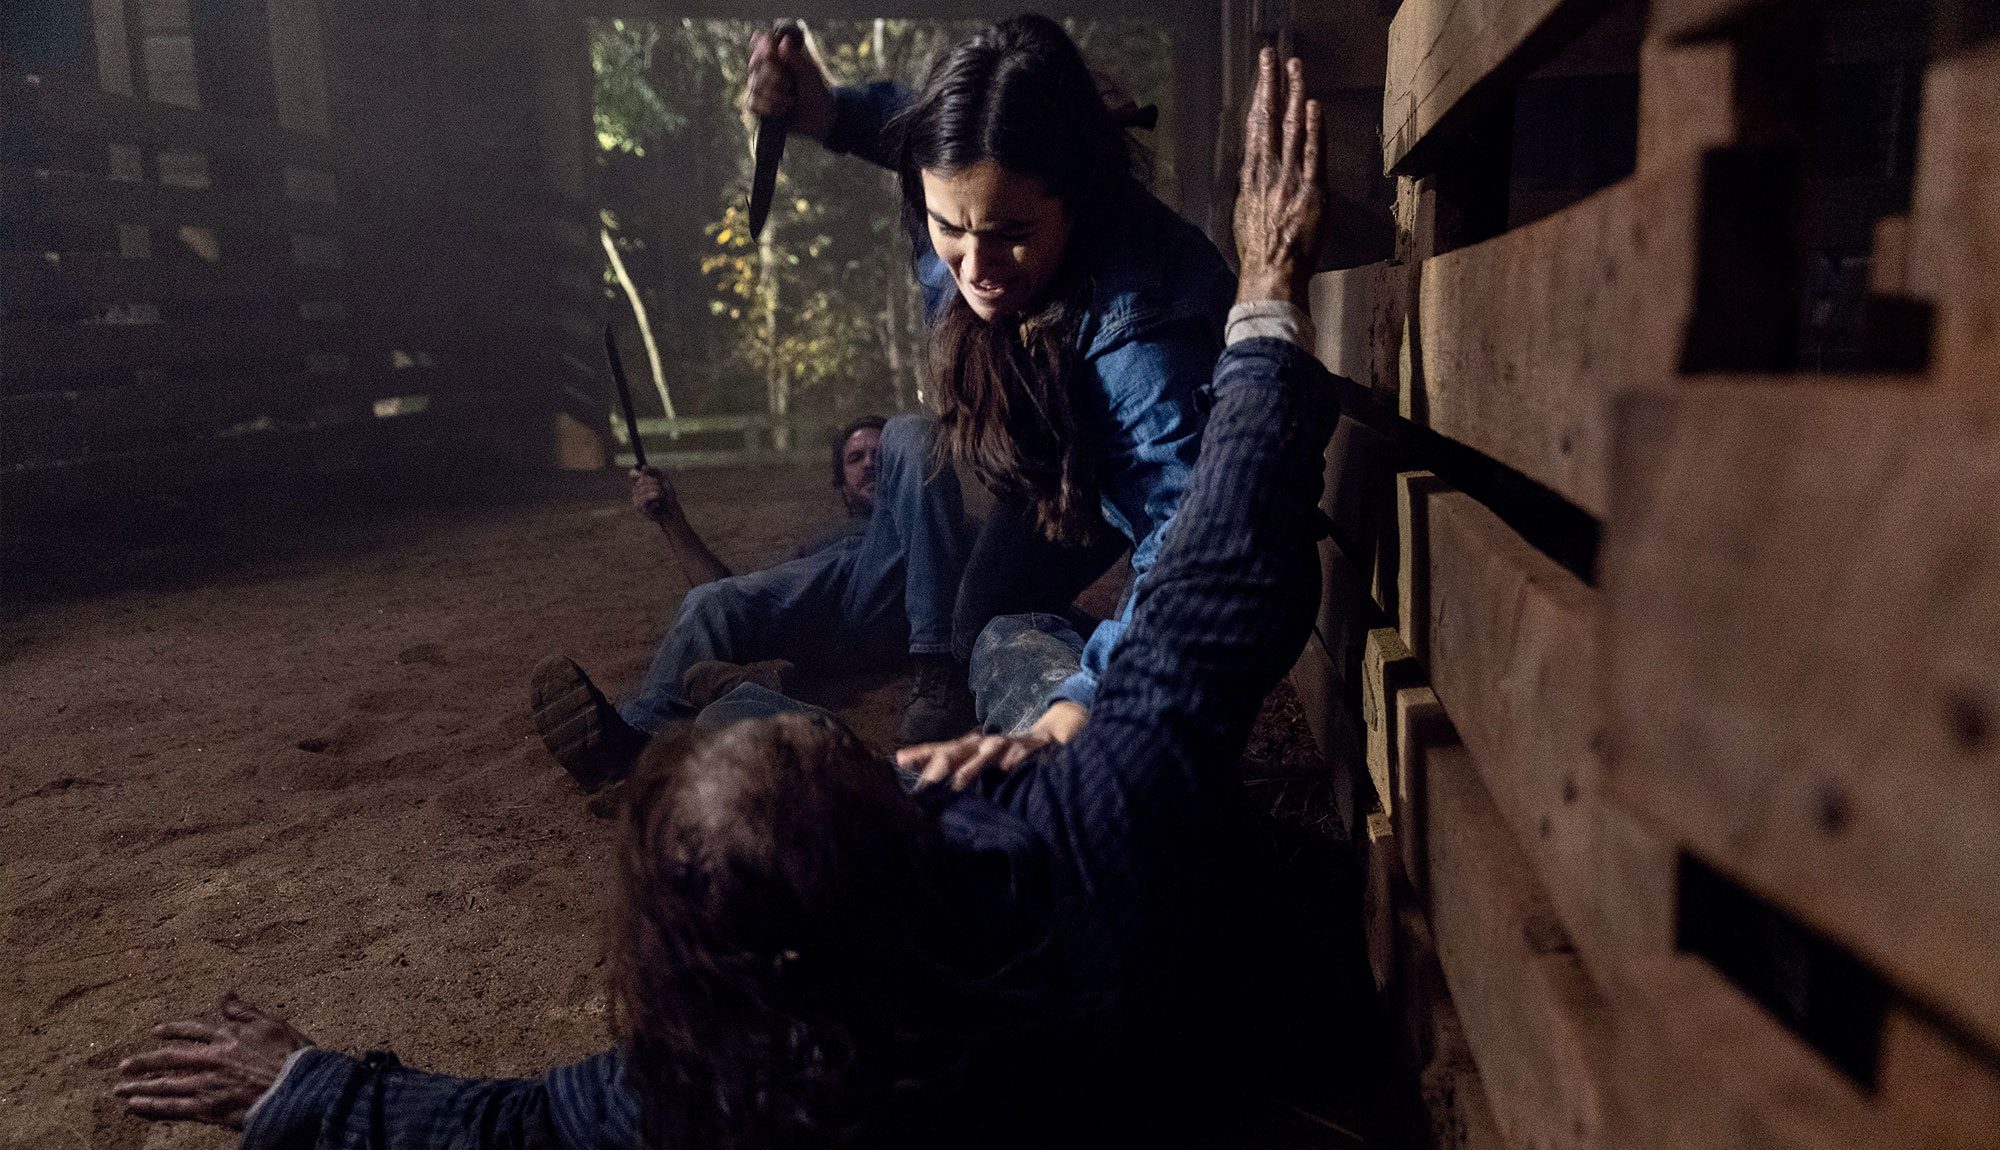 Alanna Masterson Opens Up About Tara’s Death On The Waking Dead